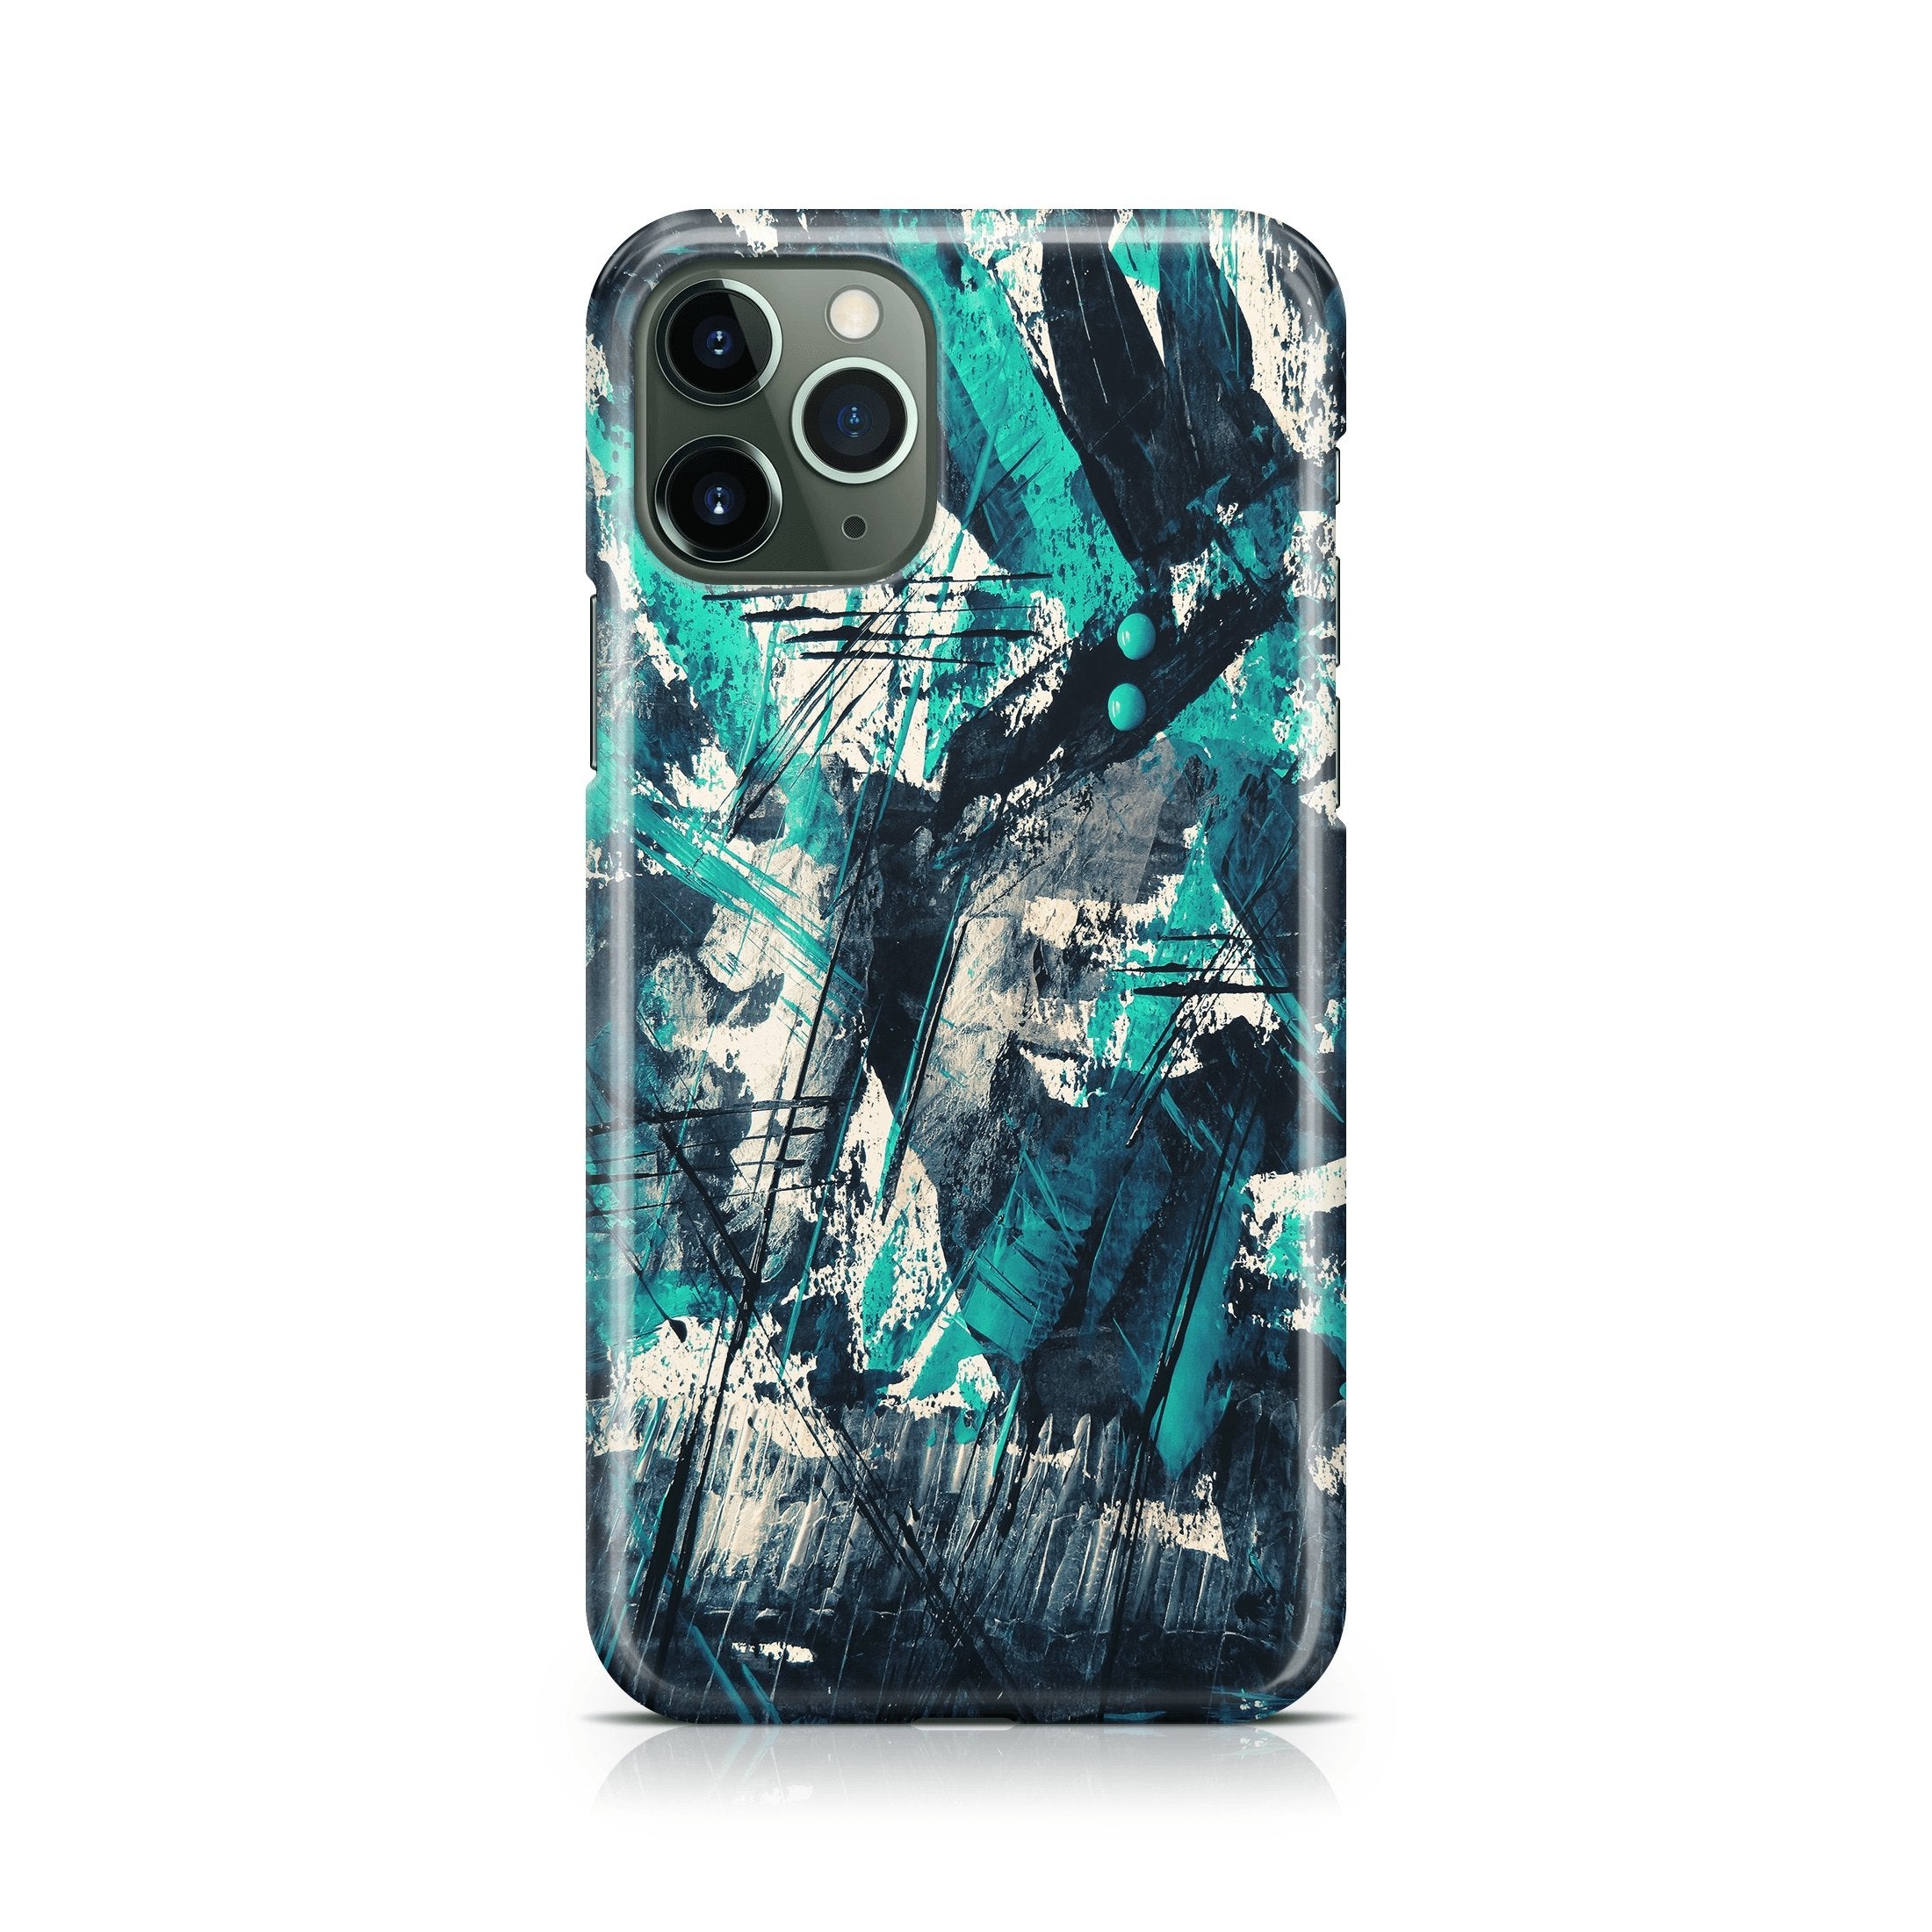 Blue Chaos - iPhone phone case designs by CaseSwagger